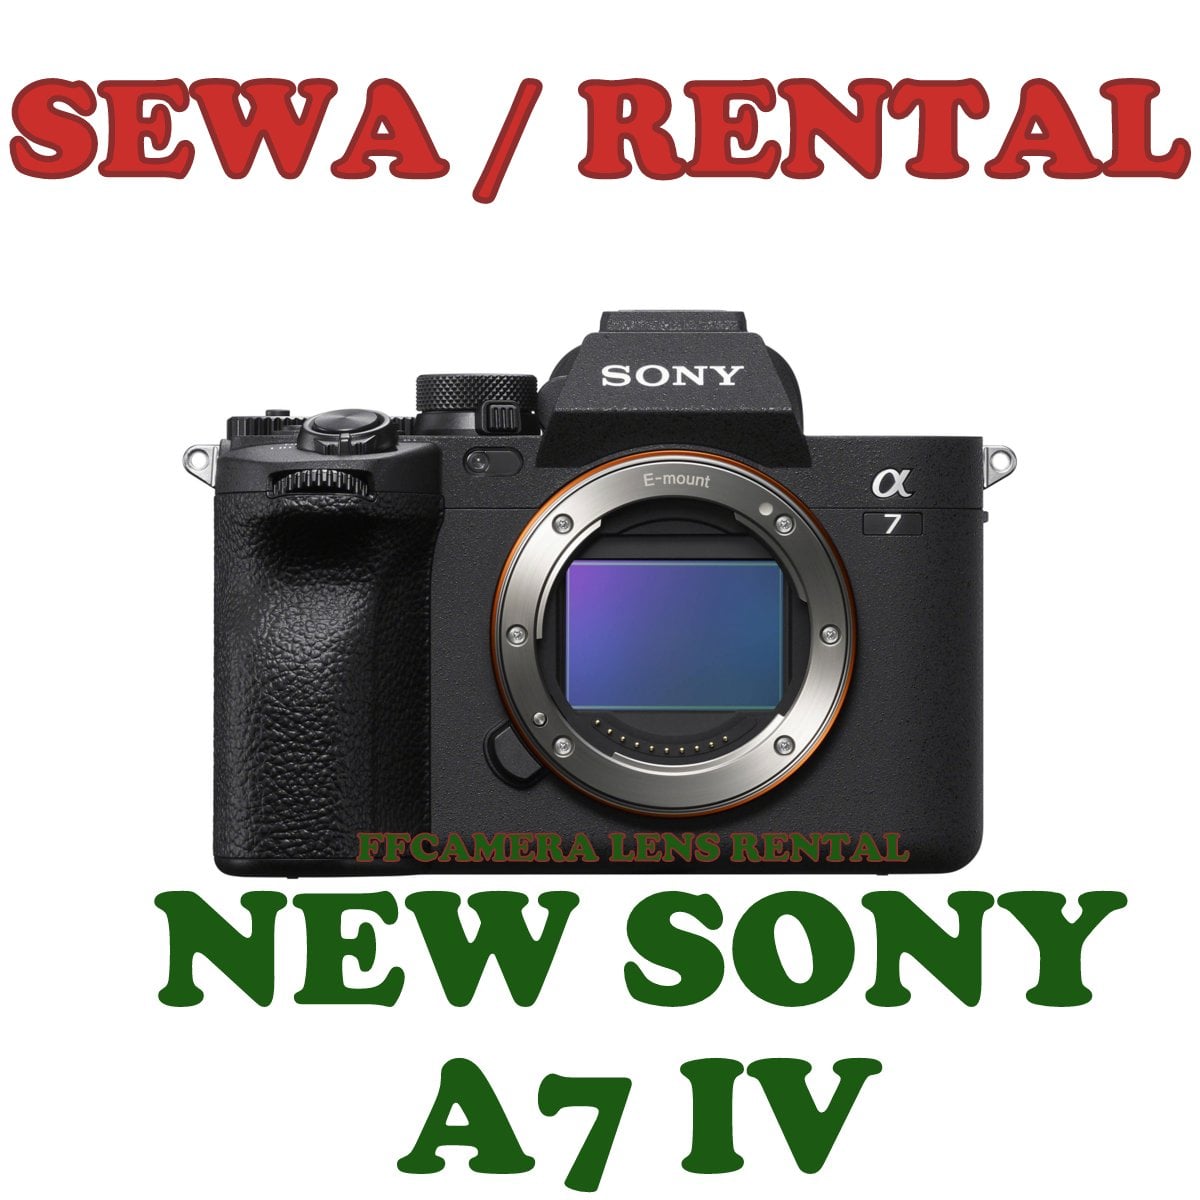 The new Sony A7 IV. Now available at FFcamera Lens Rental